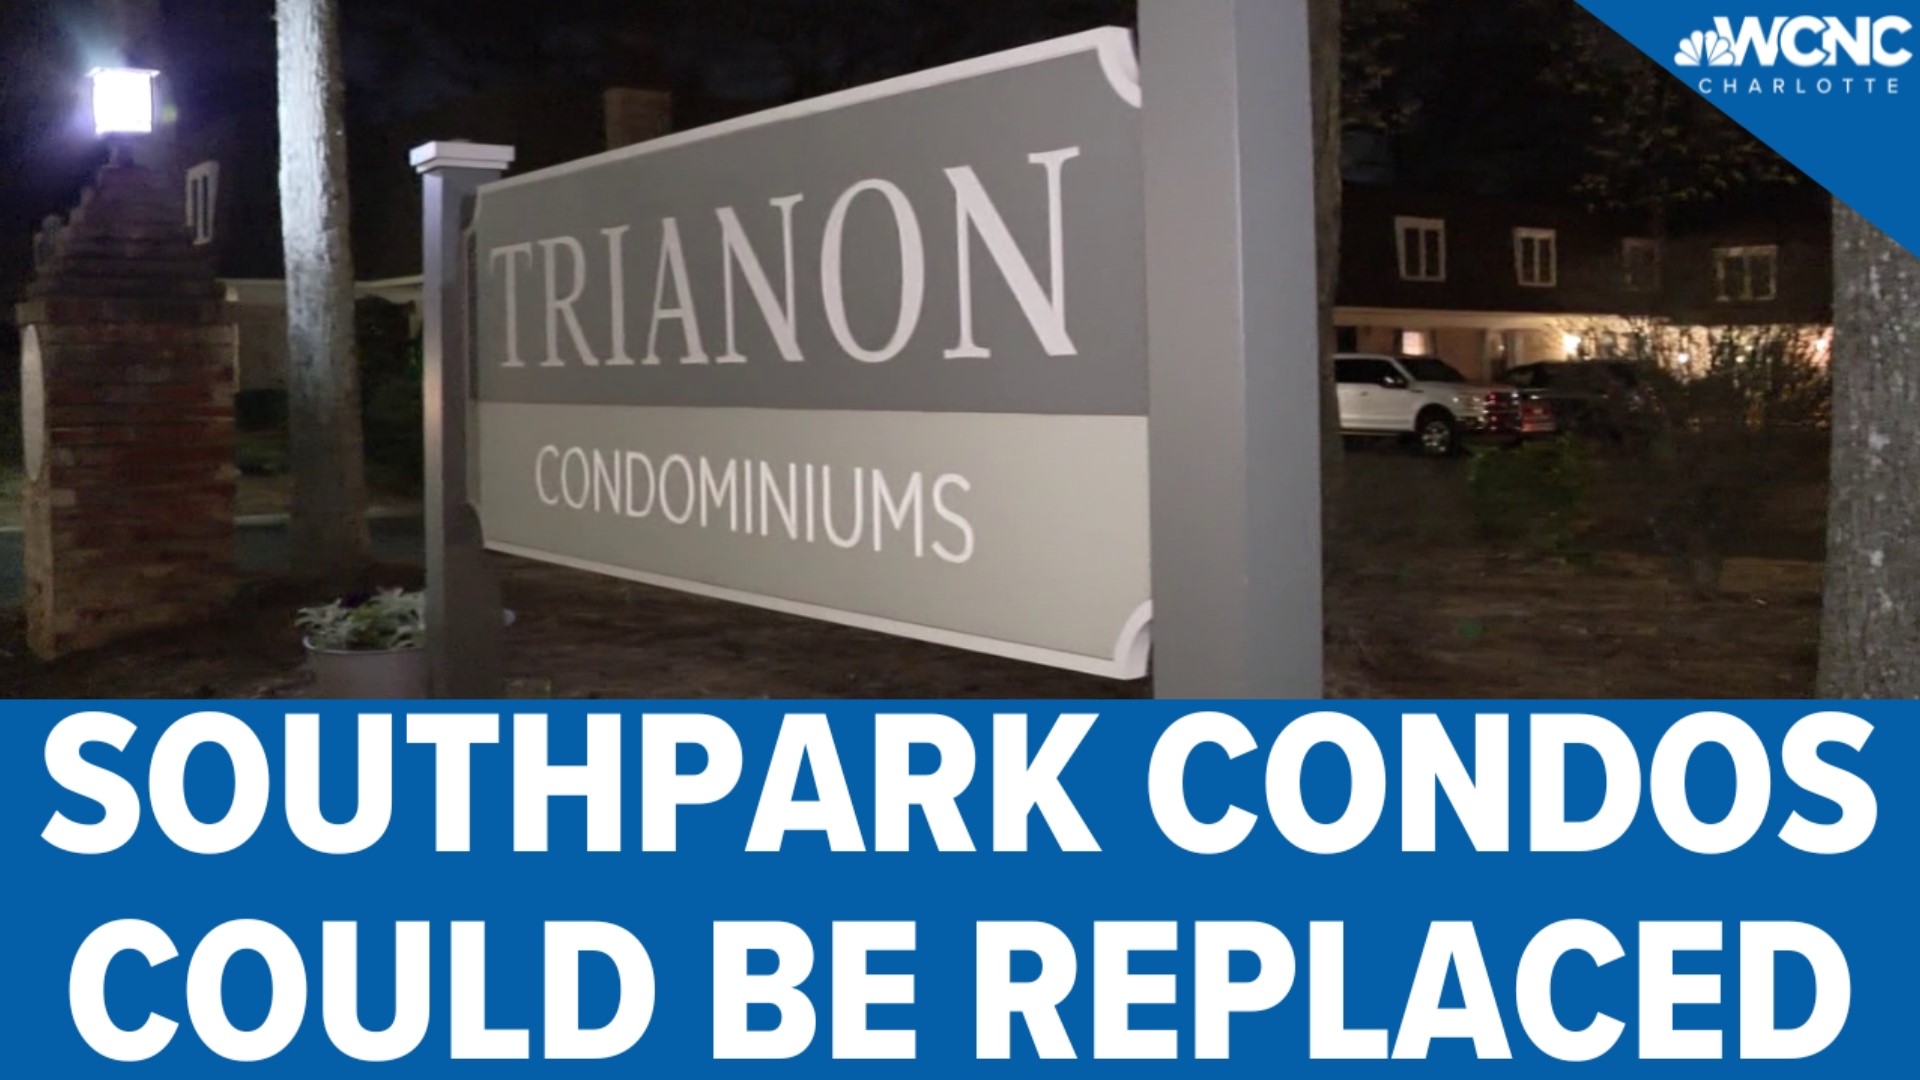 The plan, which would be just over nine acres, would tear down the one-story Trianon condos near SouthPark Mall for apartments, townhomes, retail and restaurants.